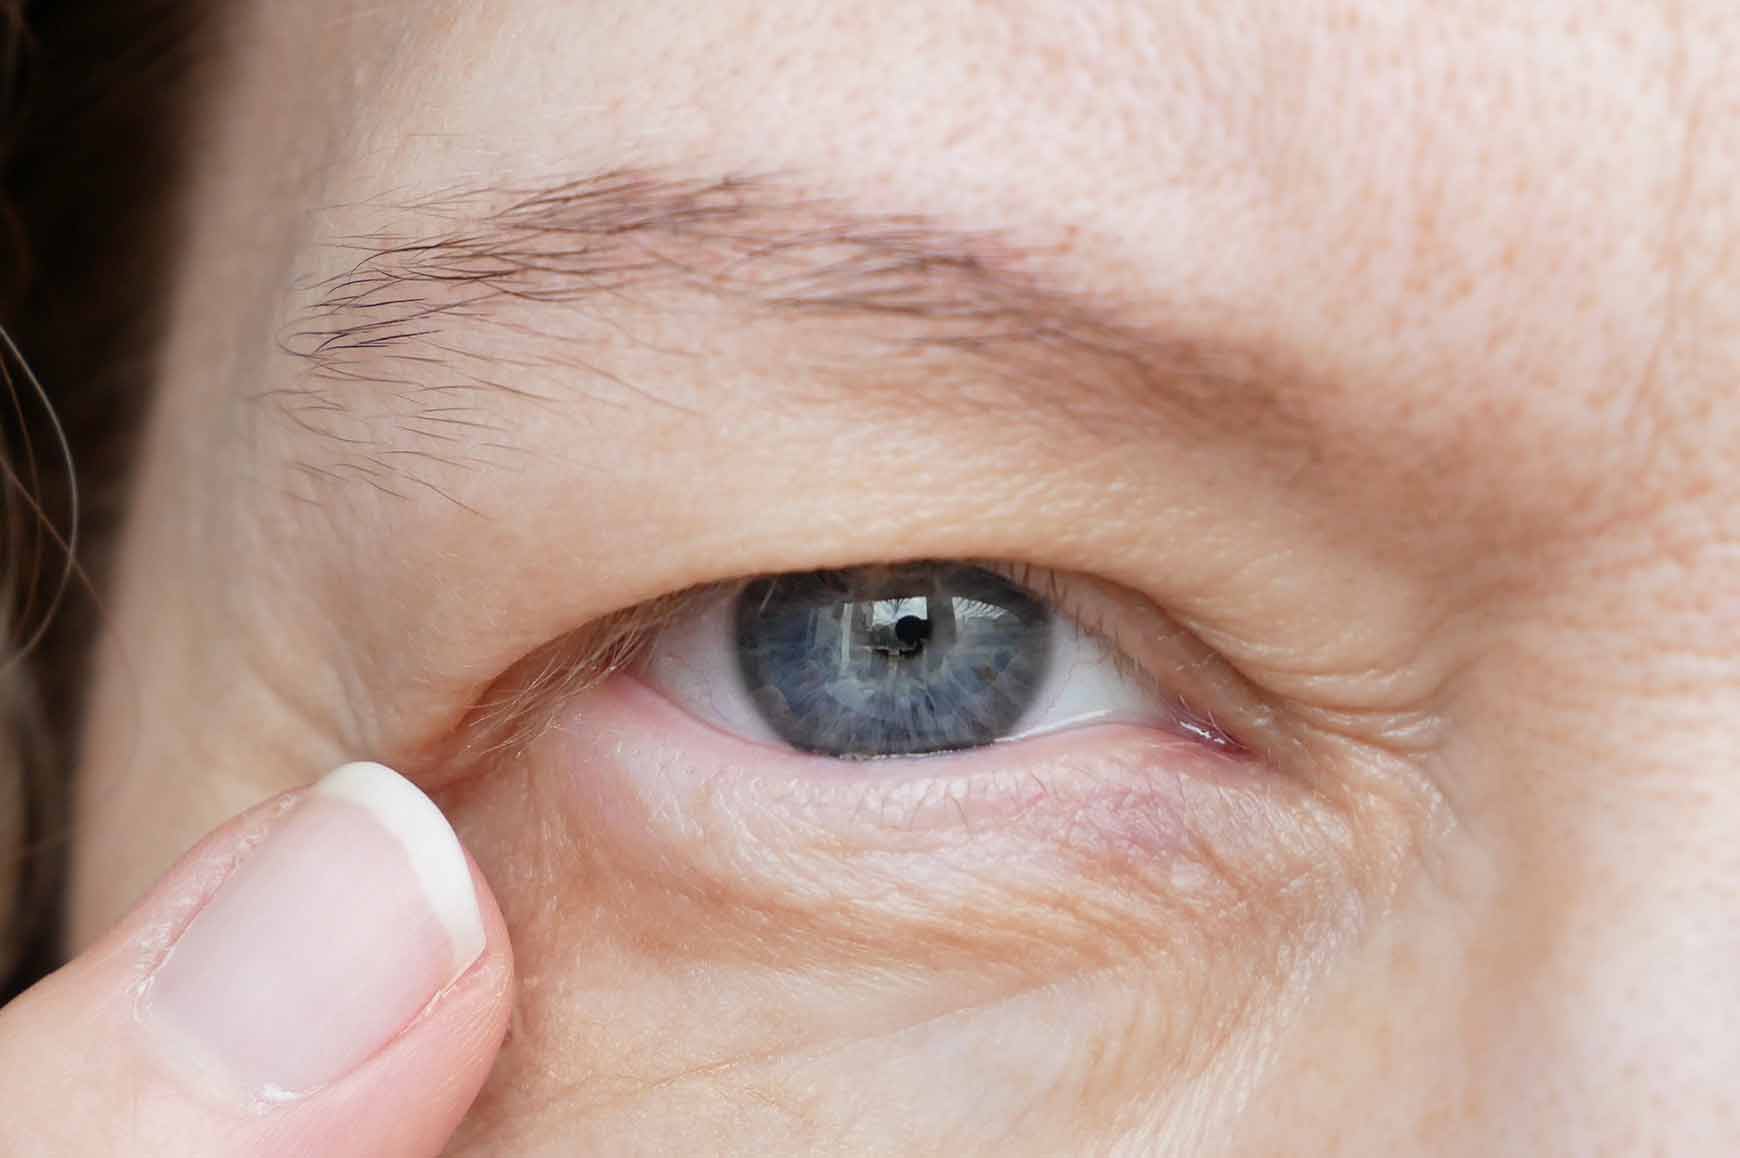 Do you need eyelid surgery? Contact Dr. Melissa Marks to find out more.